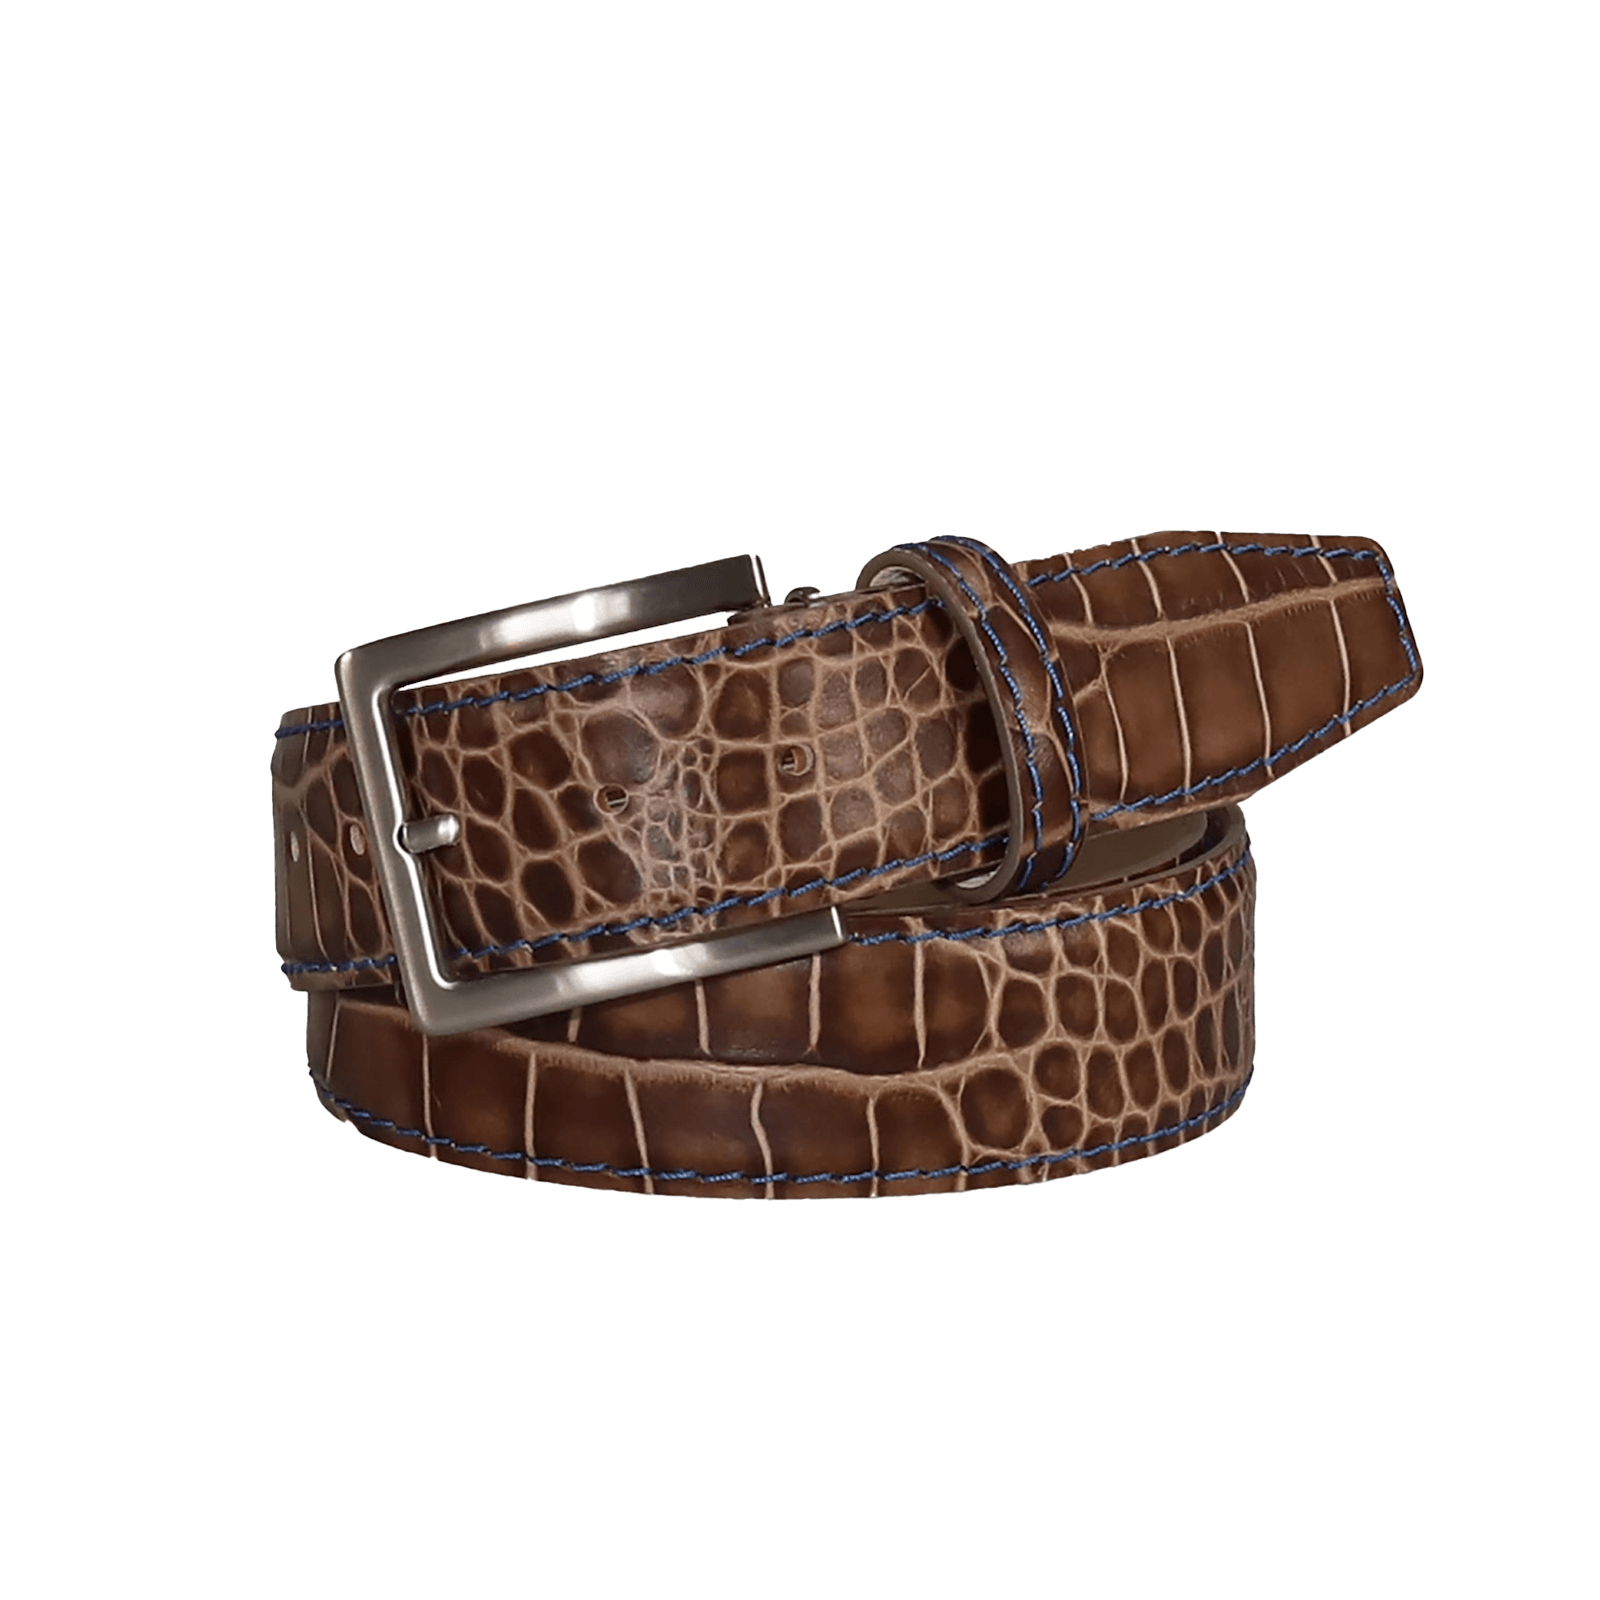 Men's Reversible Stitched Leather Belt in Brown Cognac